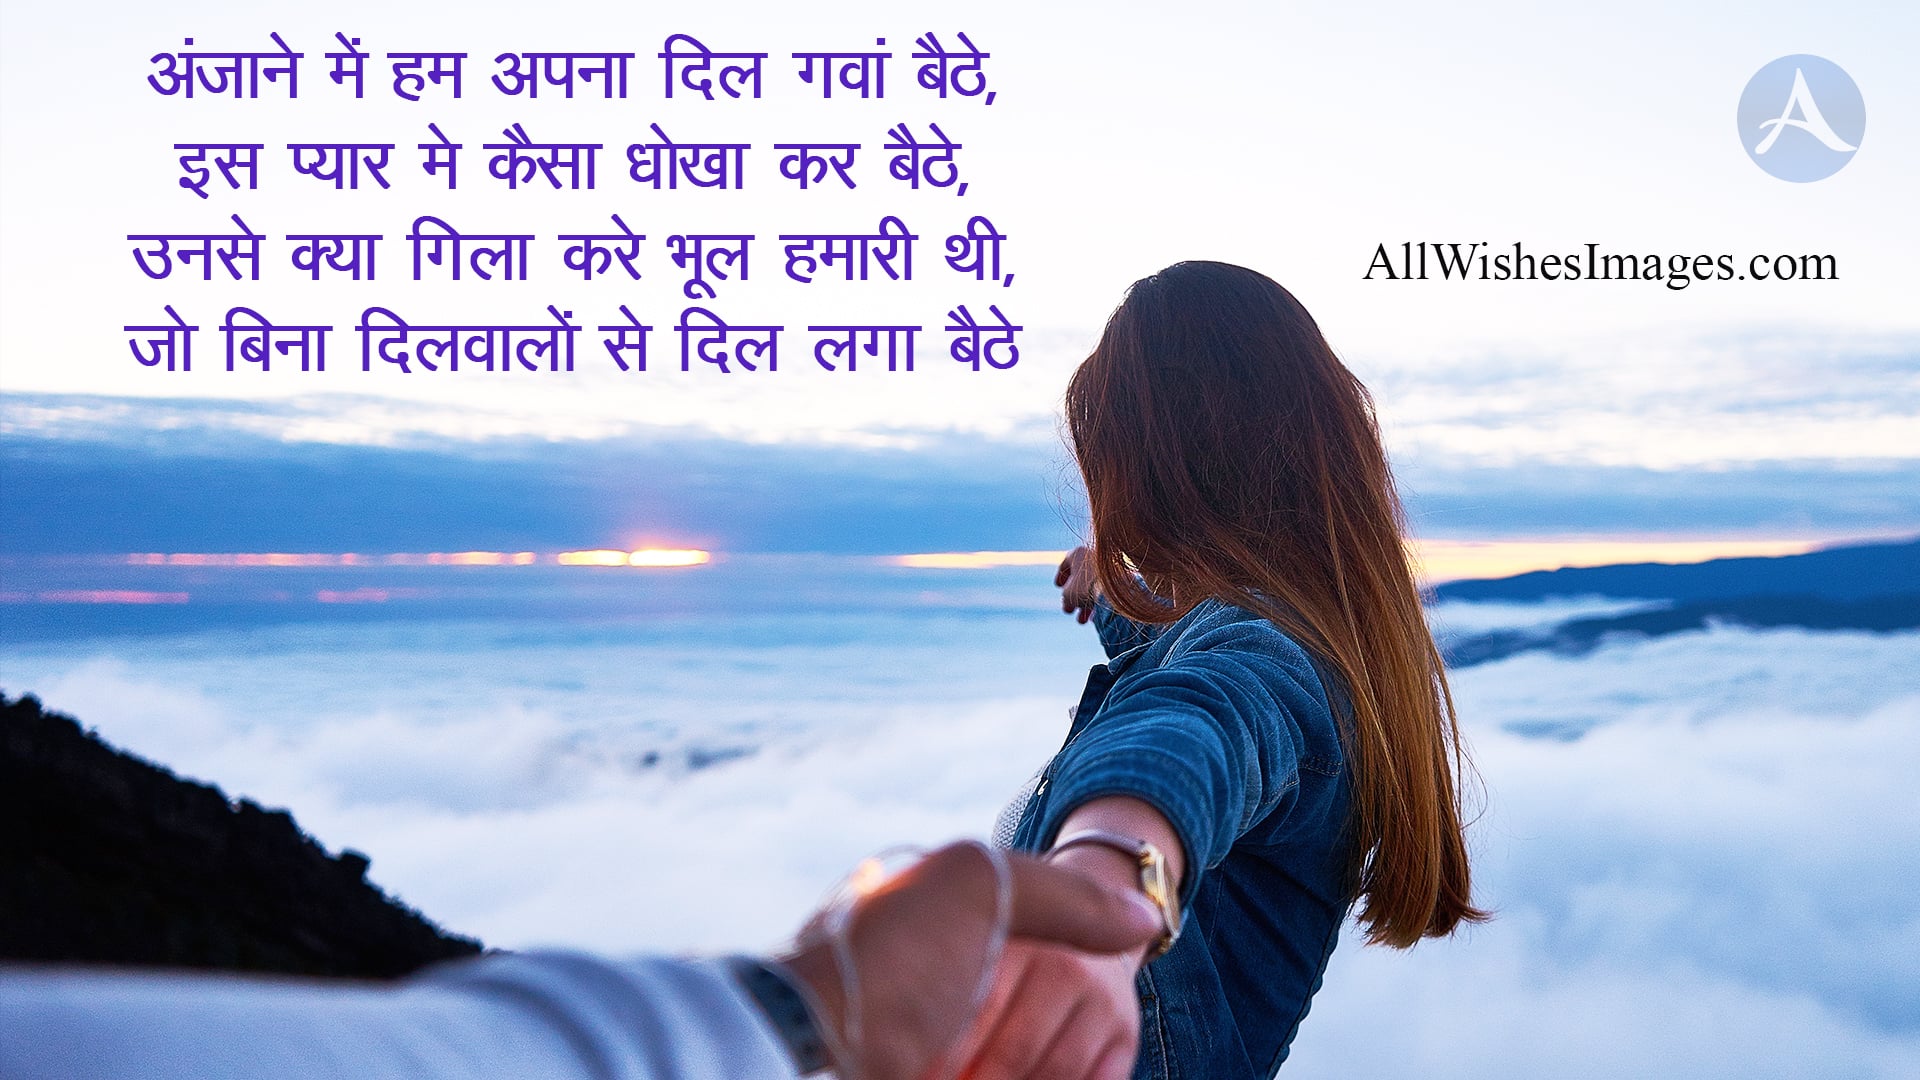 Bewafa Shayari In Hindi With Image - All Wishes Images - Images for WhatsApp